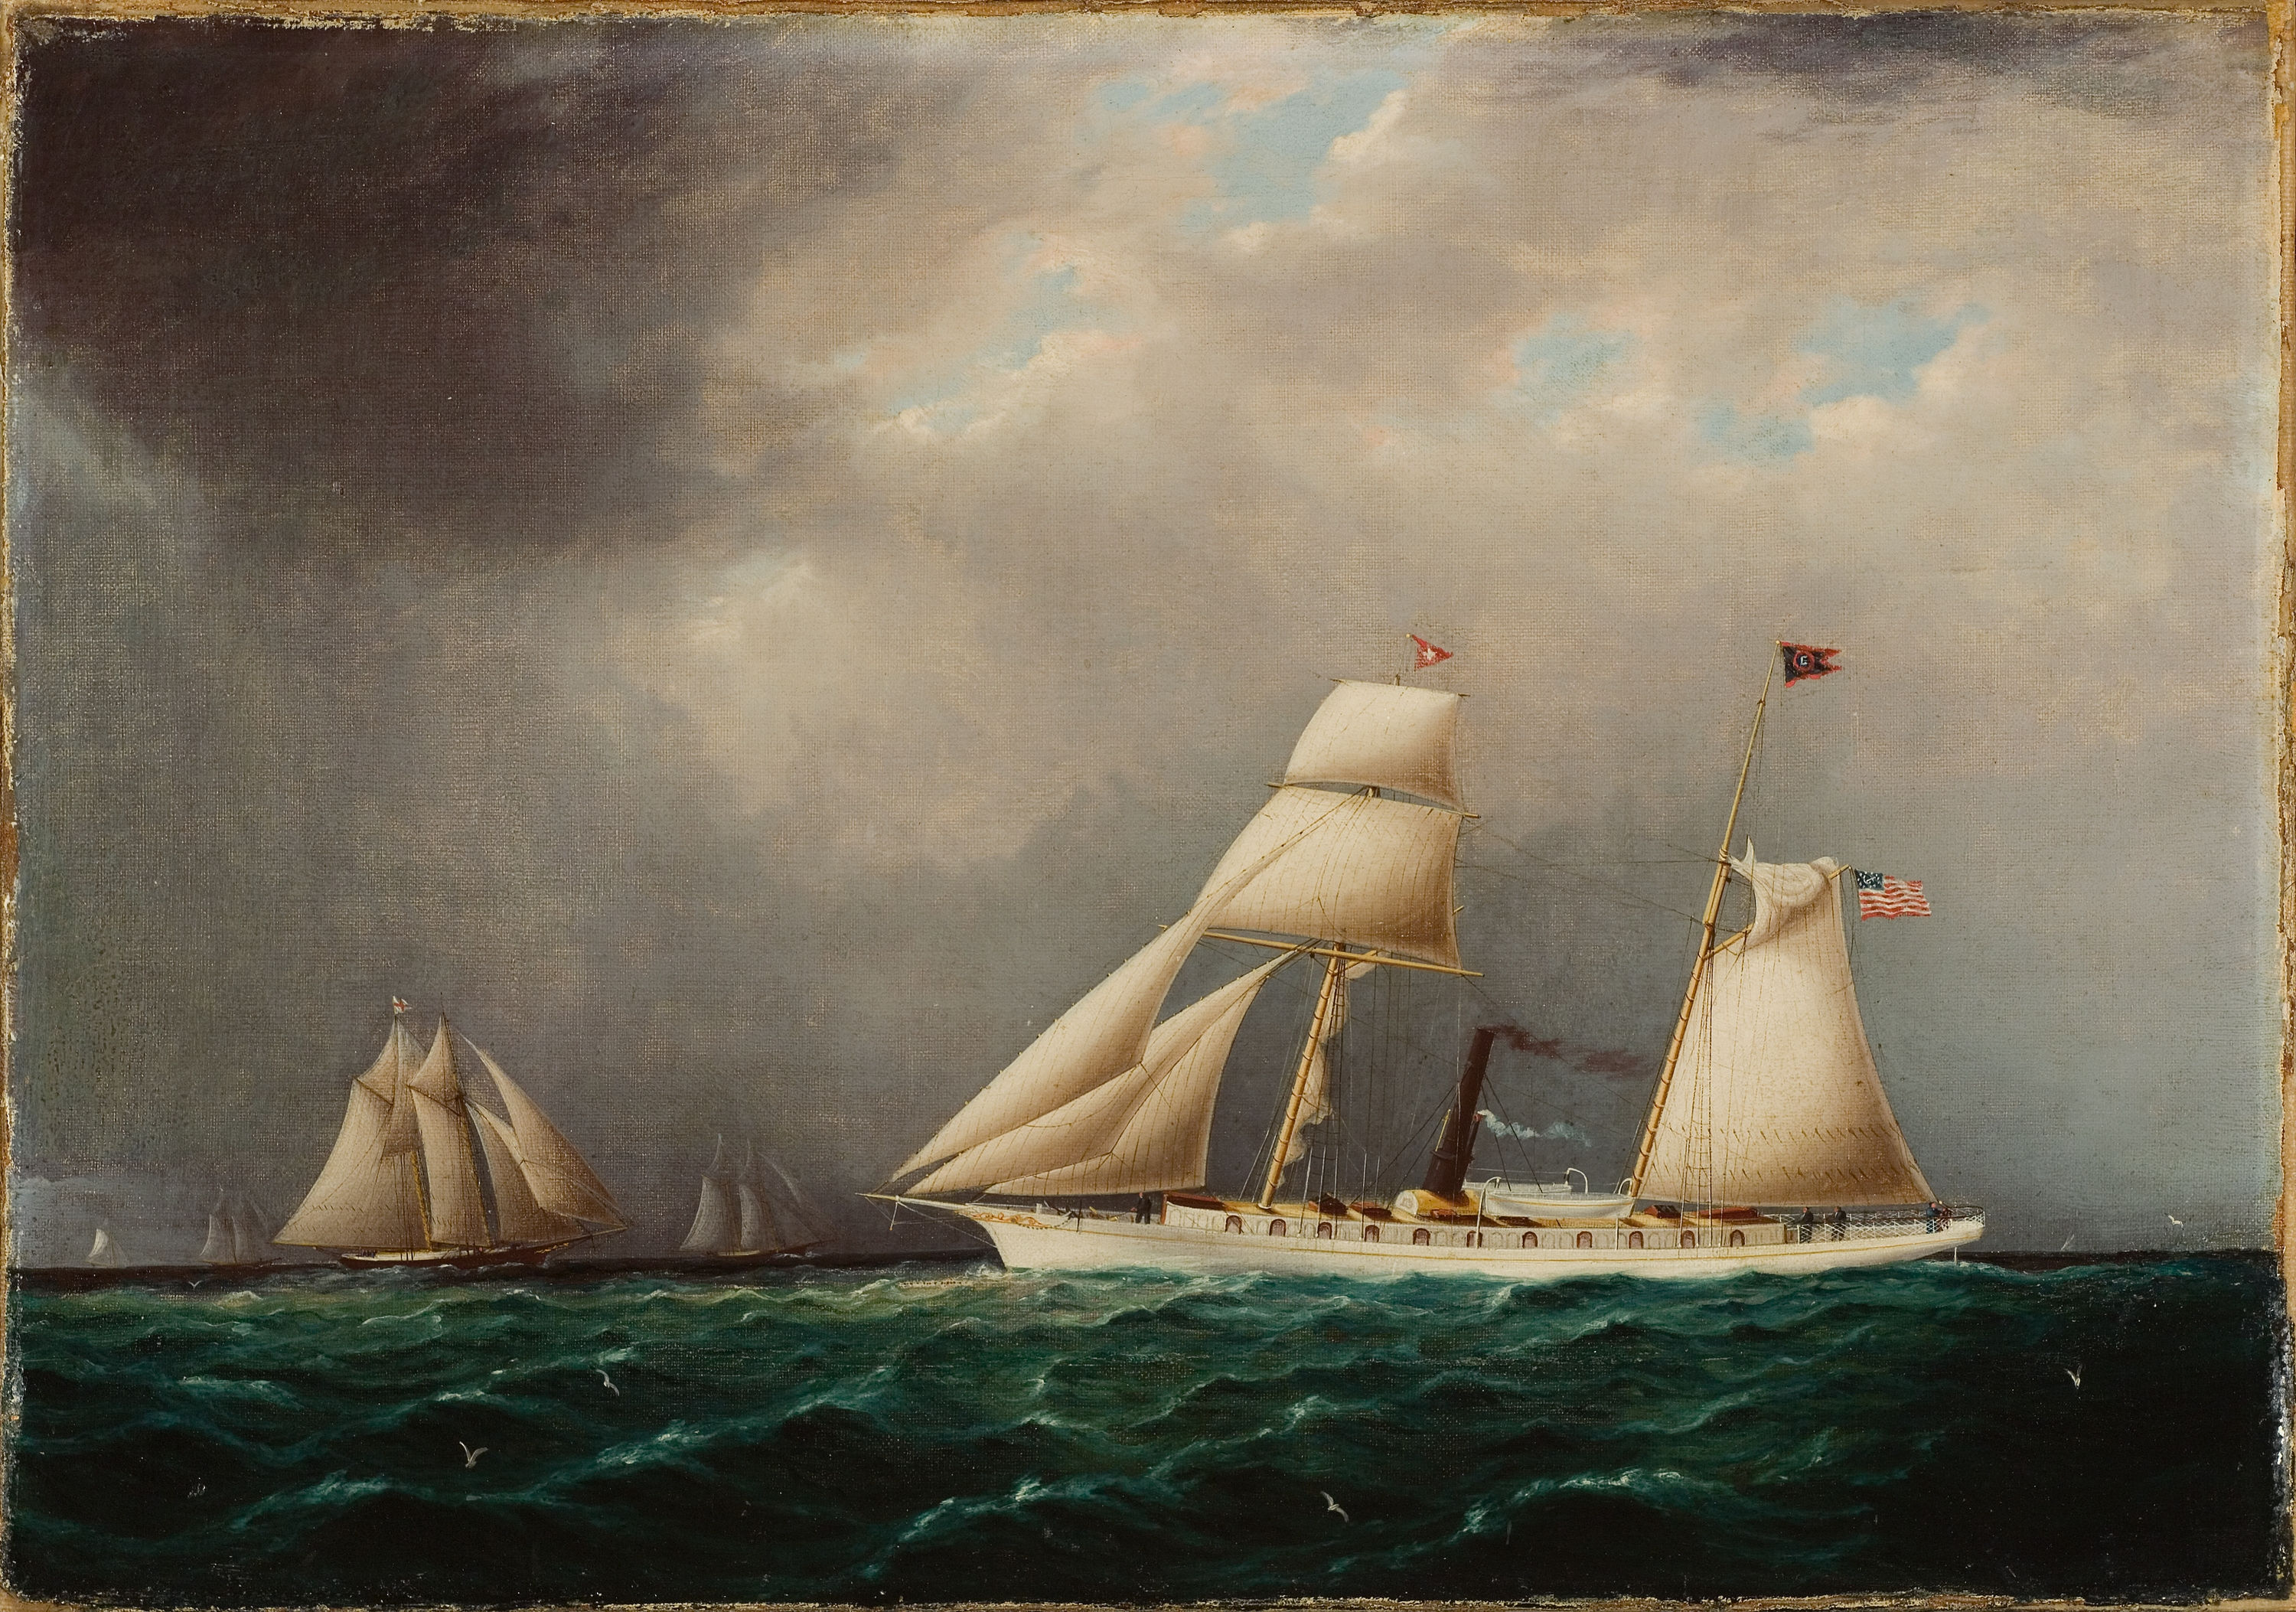 James E. Buttersworth - American Steam-Sail Yacht EMILY at Sea with Four Schooners Off Bow